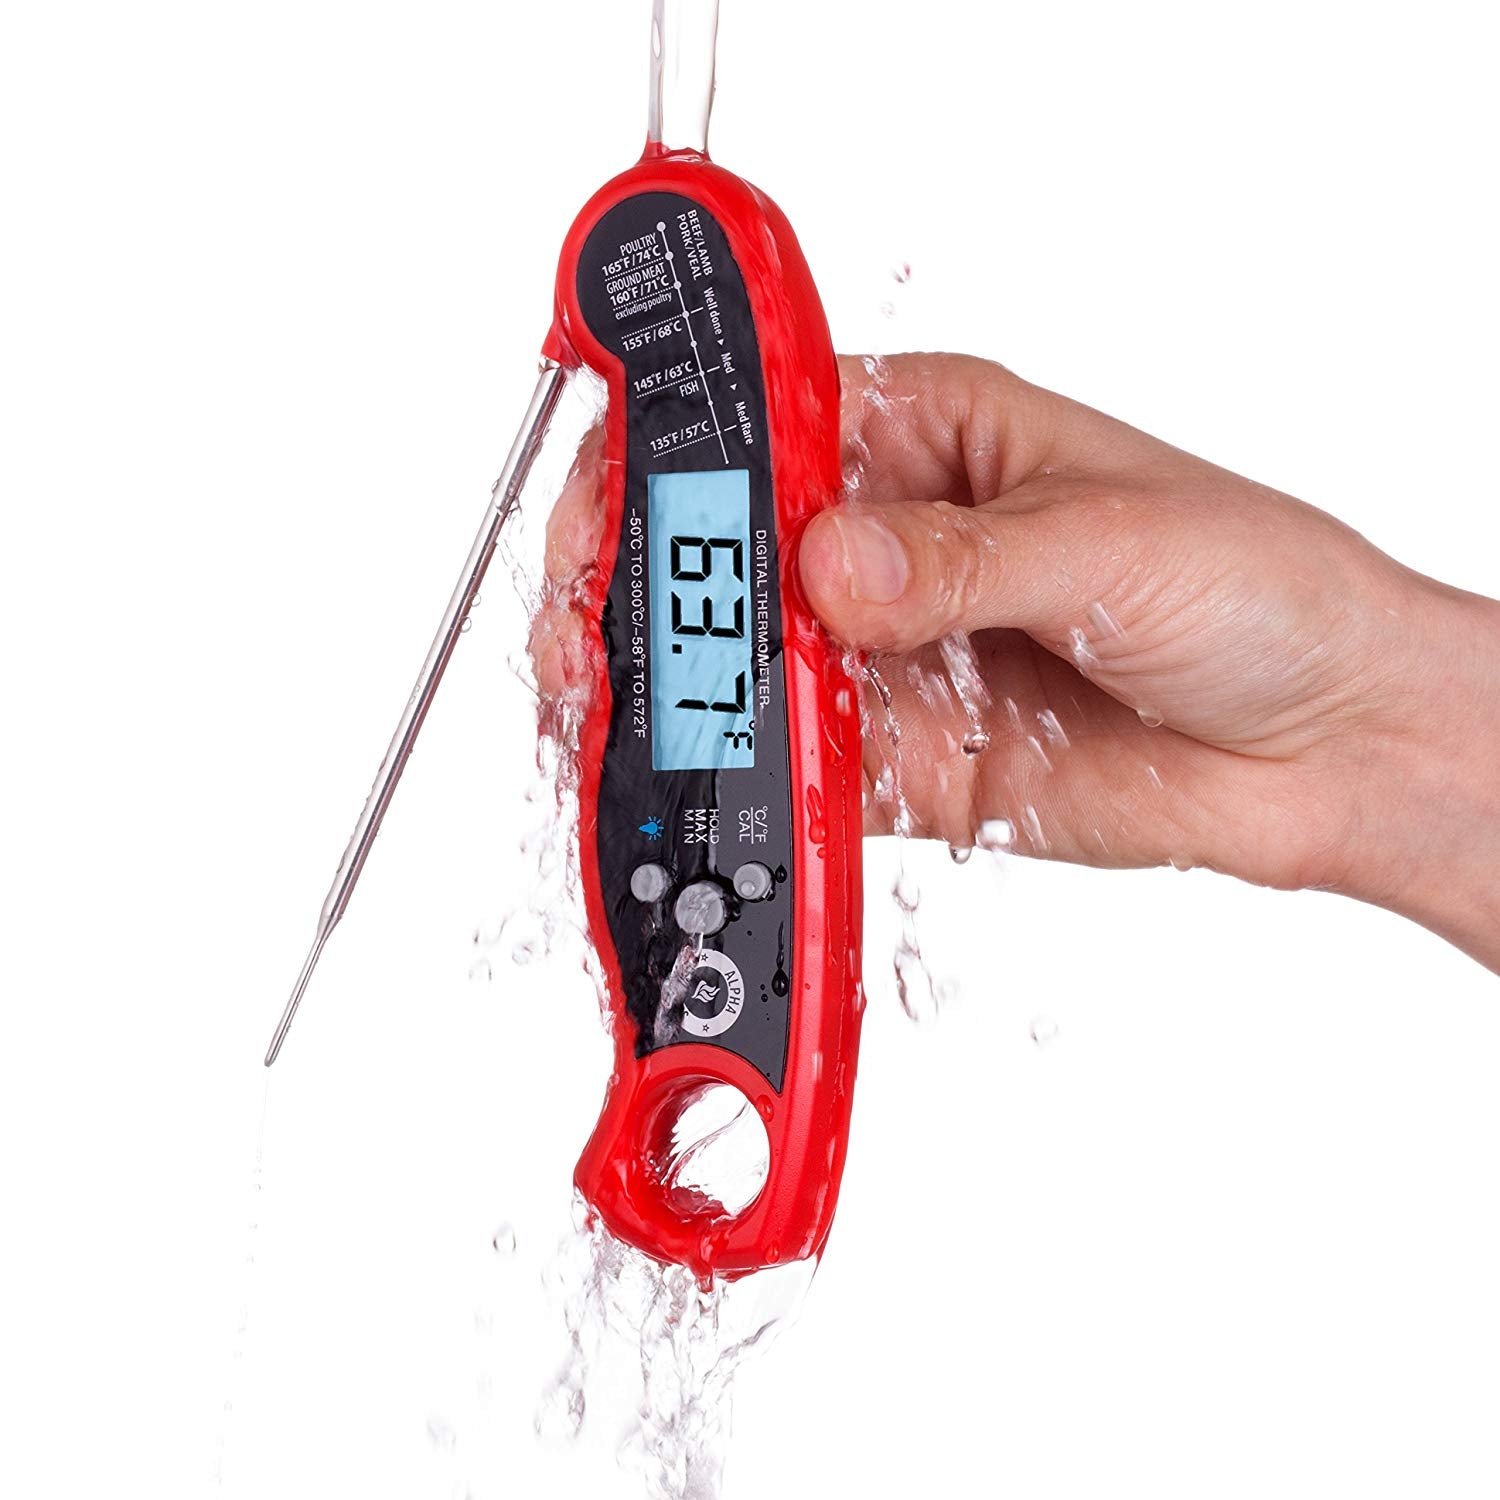 https://thegadgetcollective.com.au/cdn/shop/products/alpha-grillers-instant-read-meat-thermometer-for-grill-and-cooking-upgraded-with-backlight-and-waterproof-body-best-ultra-fast-digital-kitchen-probe-487919.jpg?v=1698982110